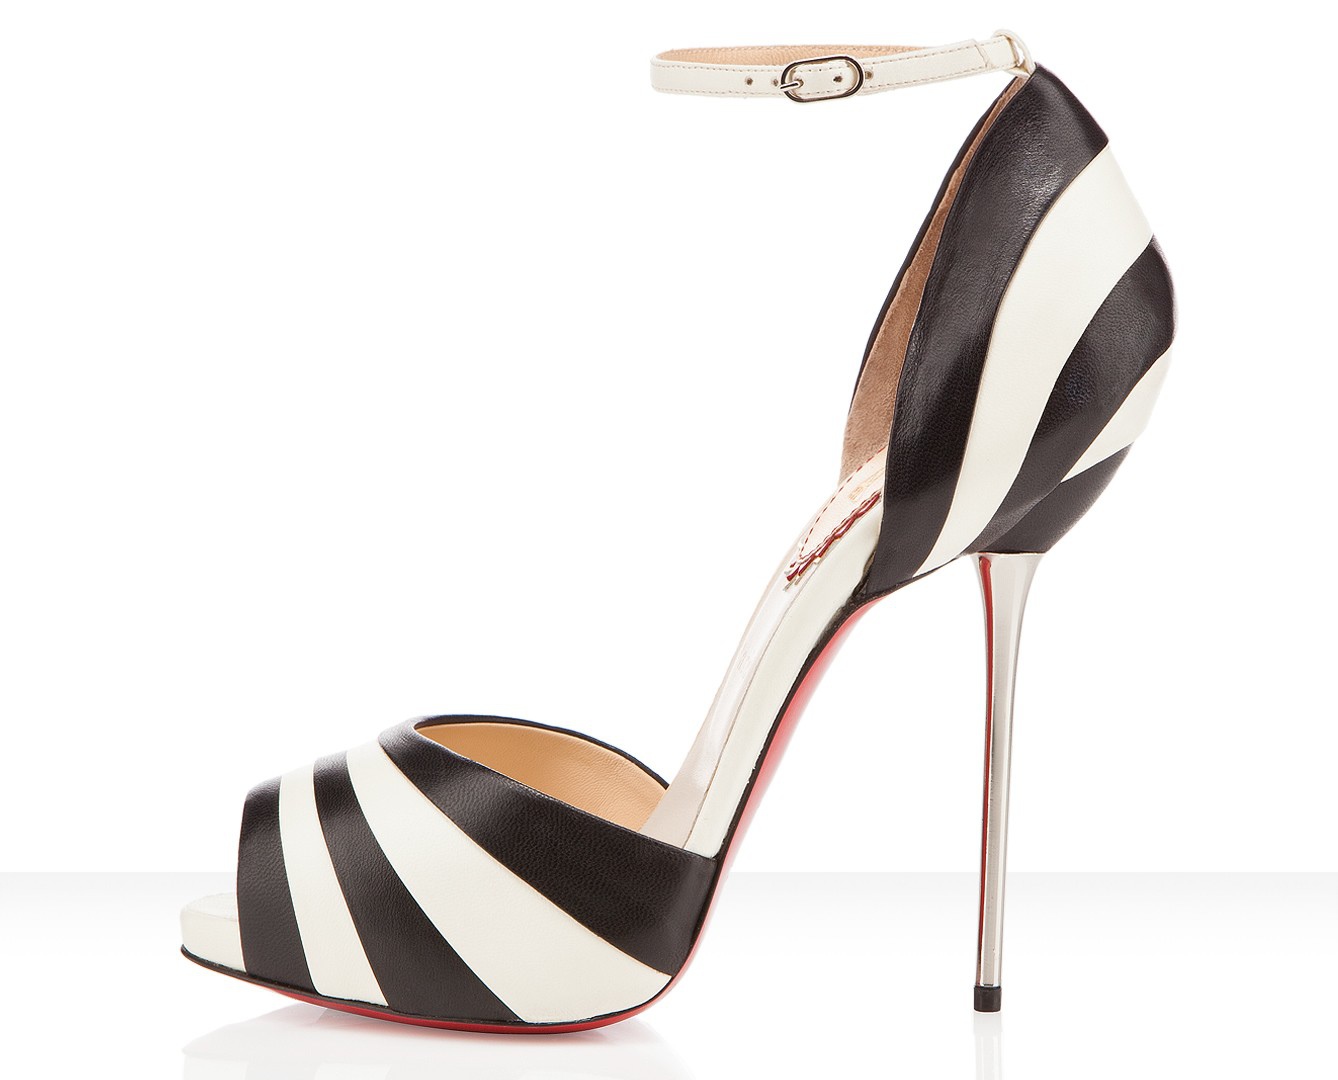 Louboutin launches 20th anniversary capsule collection via exclusive ...